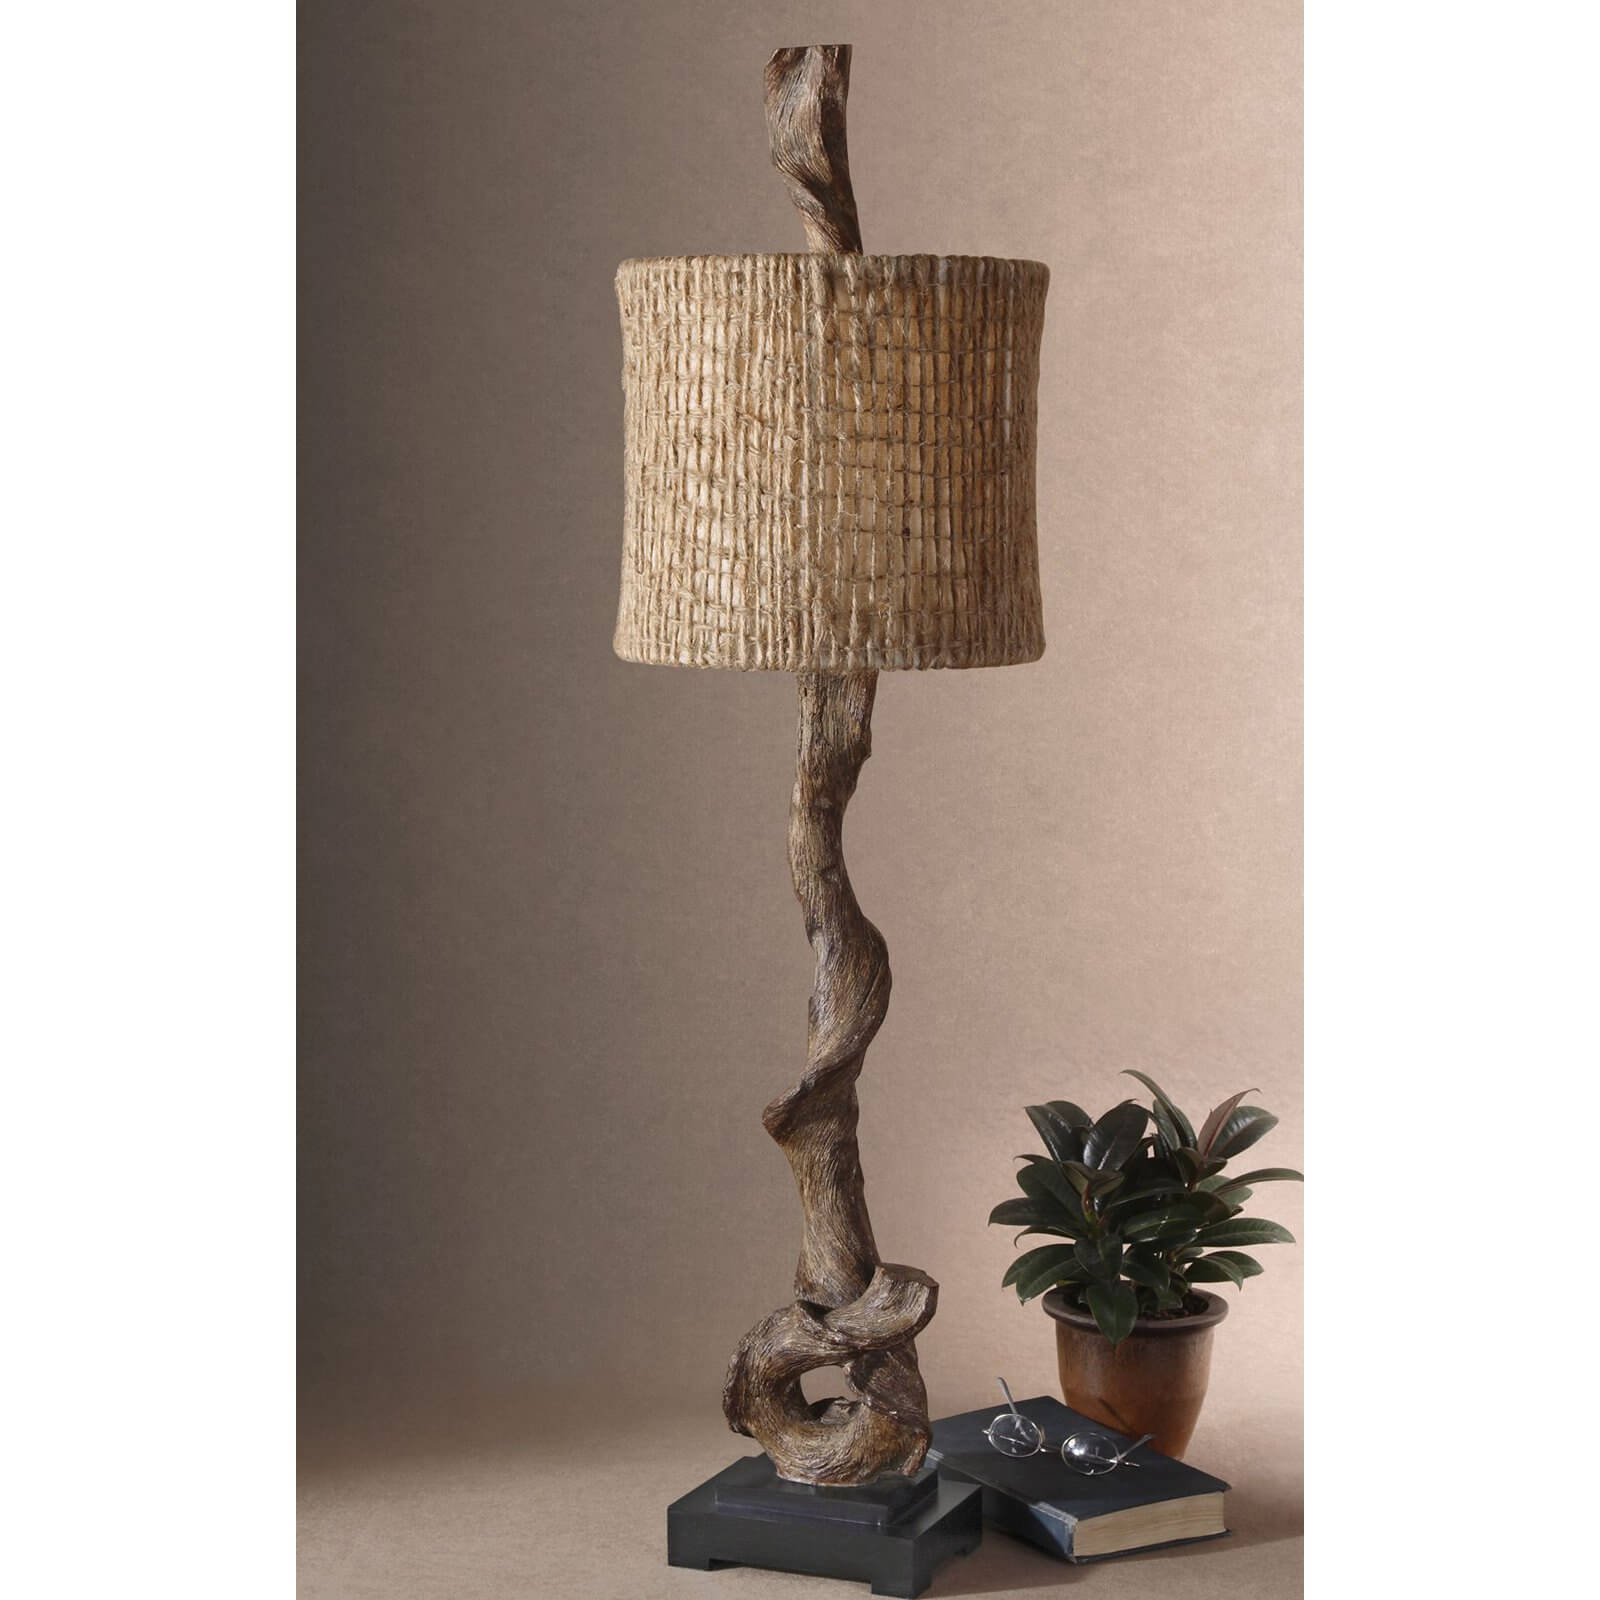 Our second buffet lamp is a unique piece done in a natural, rustic style, with the central shaft crafted from a twisted piece of wood.